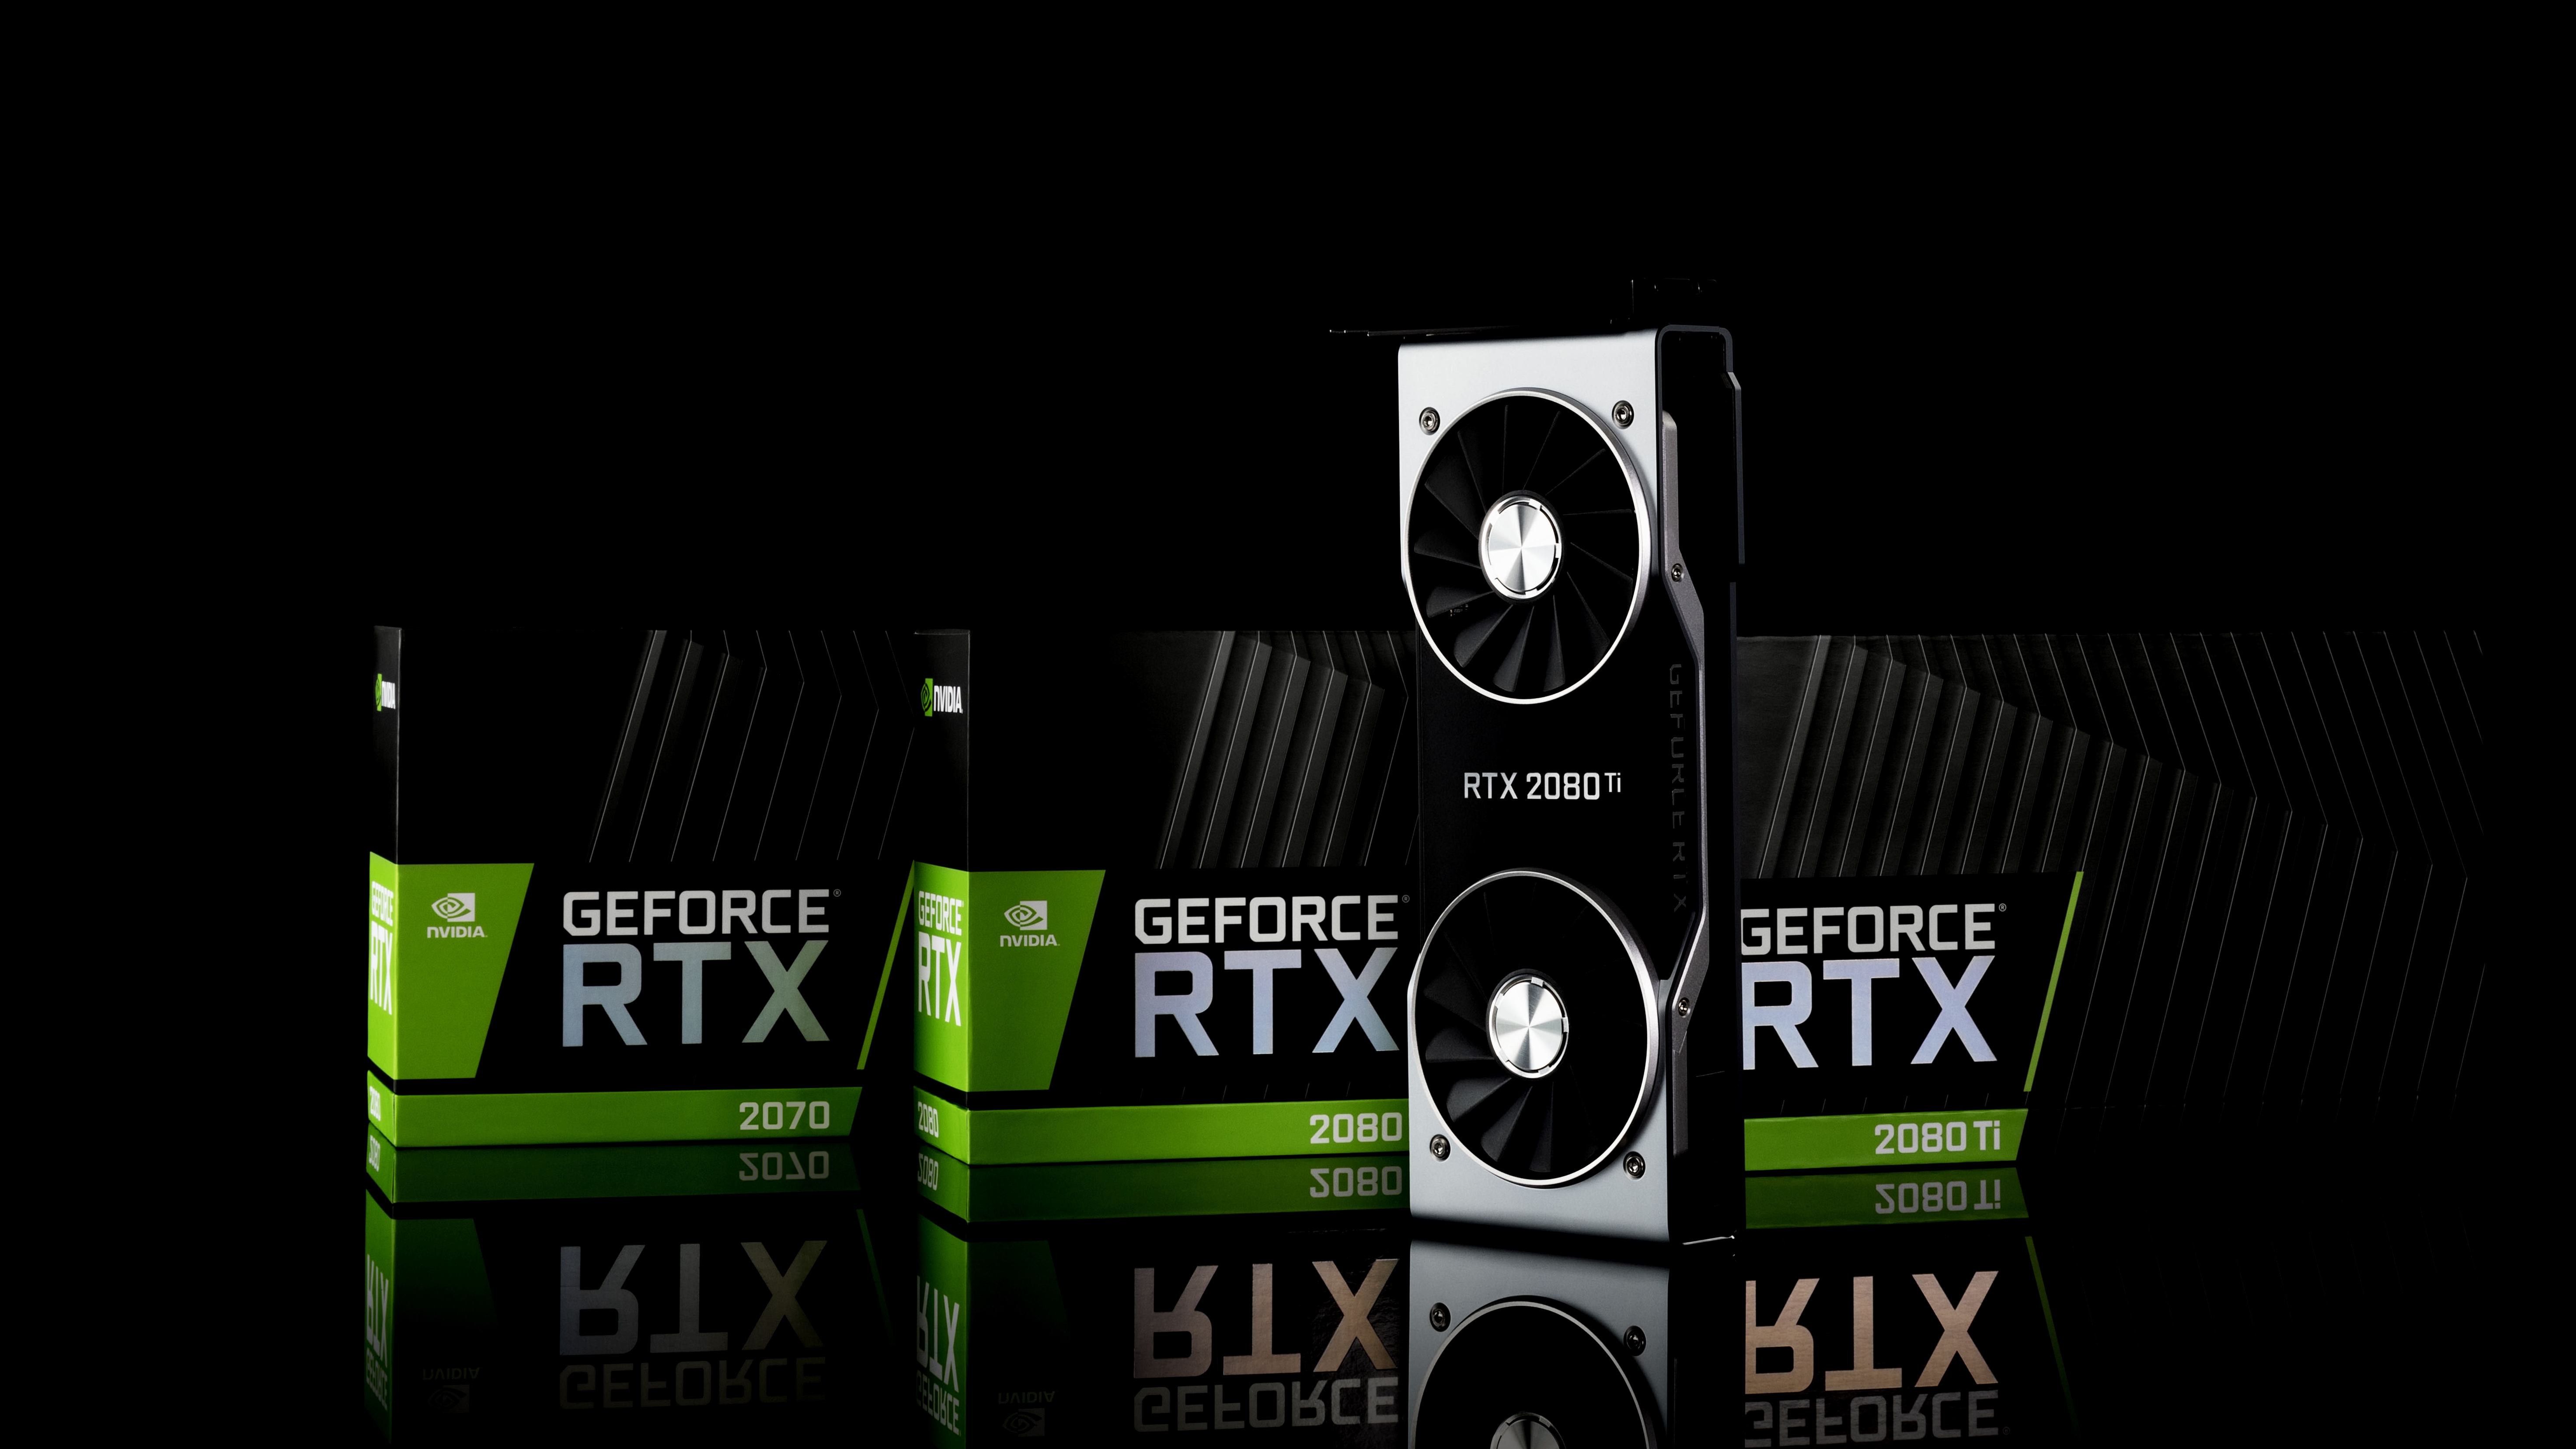 The pros and cons of Nvidia's RTX 20-series graphics cards